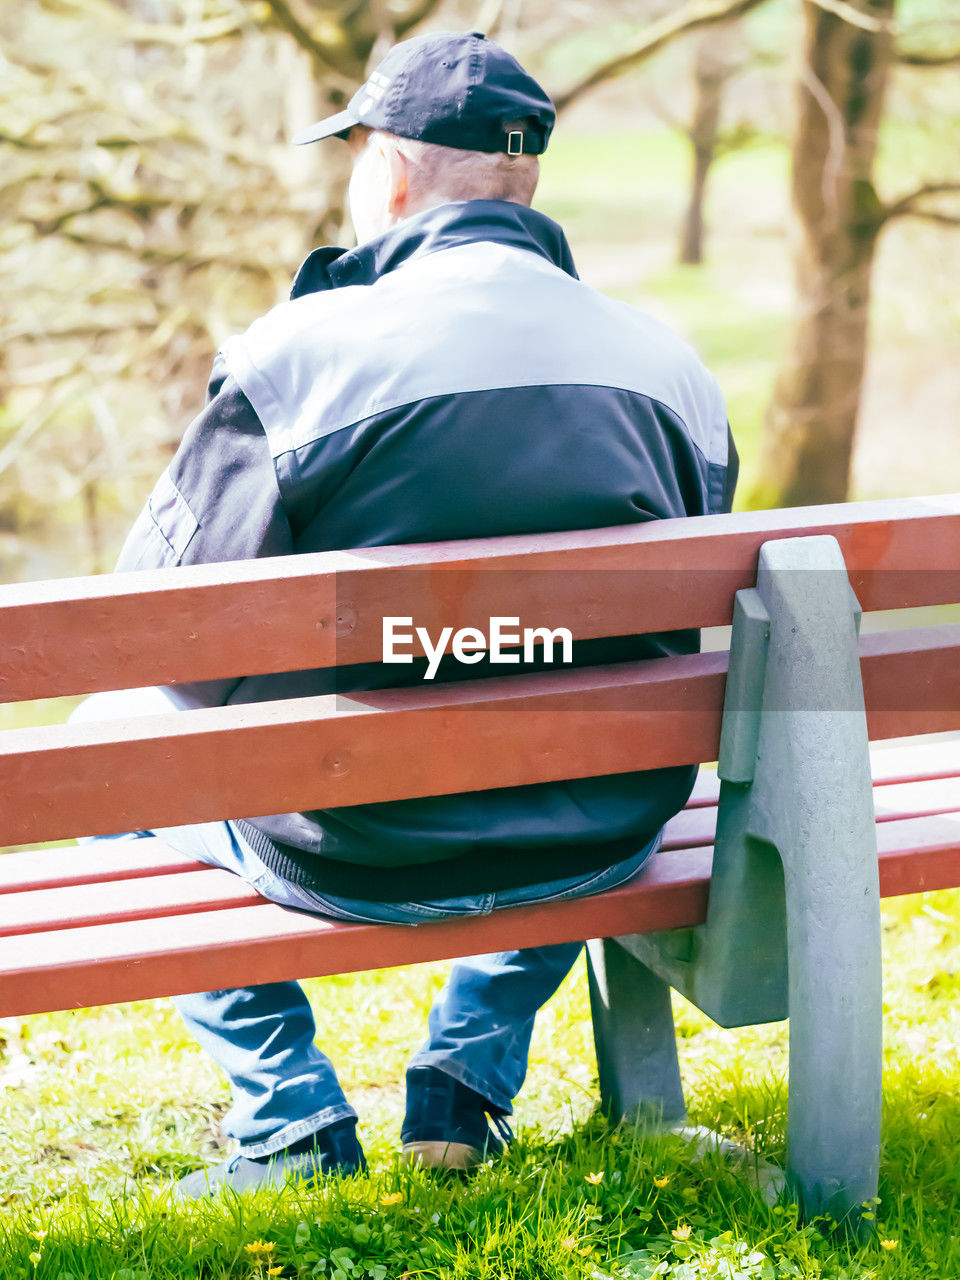 men, rear view, bench, adult, one person, seat, spring, nature, plant, sitting, relaxation, grass, park bench, leisure activity, day, park, clothing, park - man made space, outdoors, lifestyles, person, green, blue, tree, casual clothing, full length, hat, yellow, furniture, autumn, sunlight